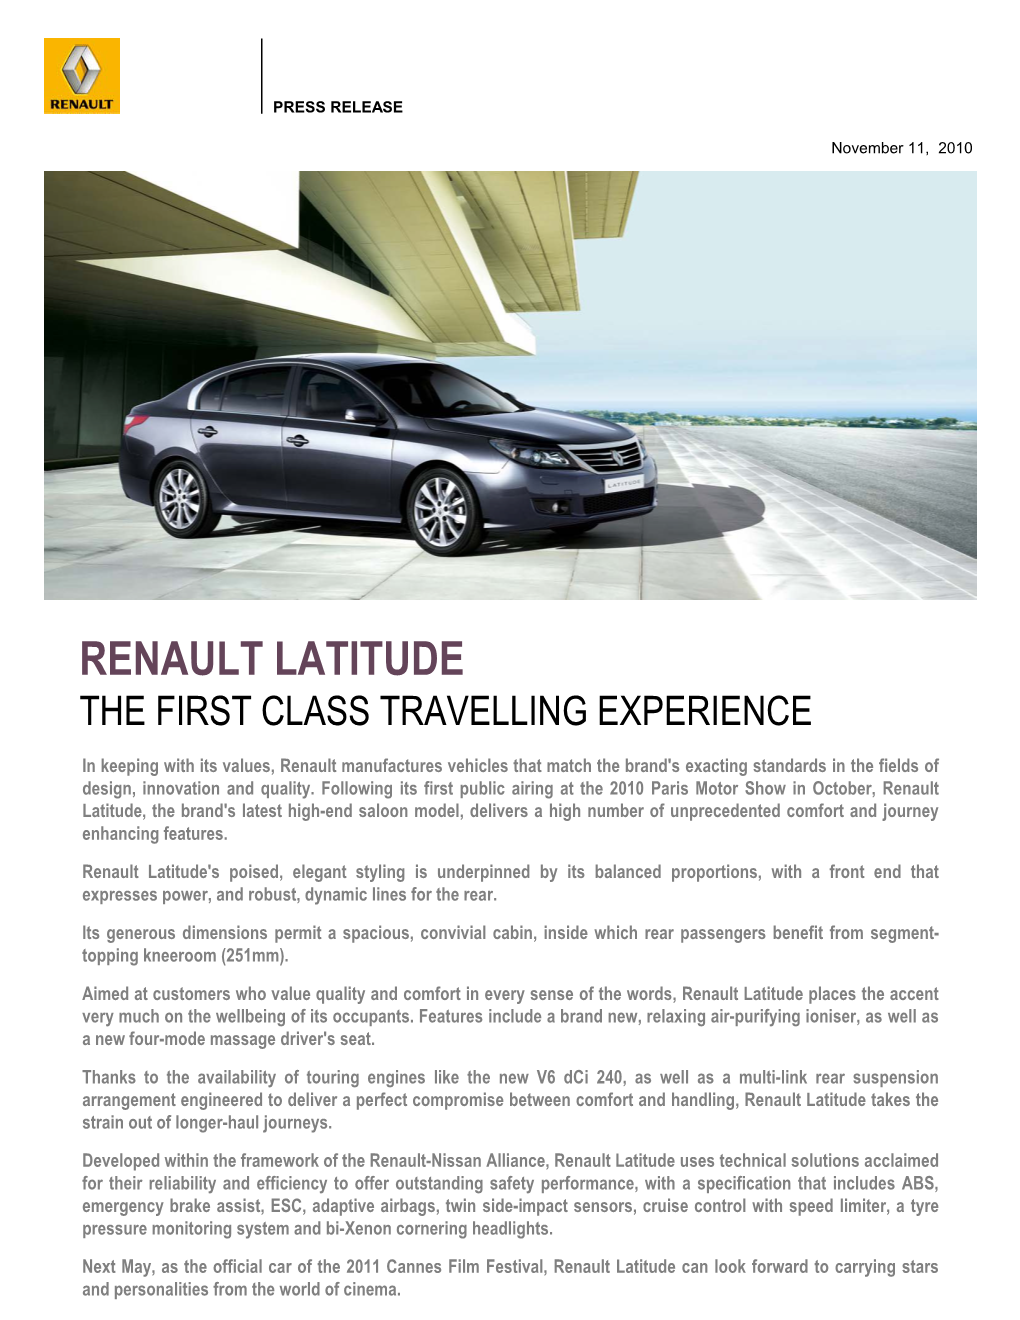 Renault Latitude the First Class Travelling Experience